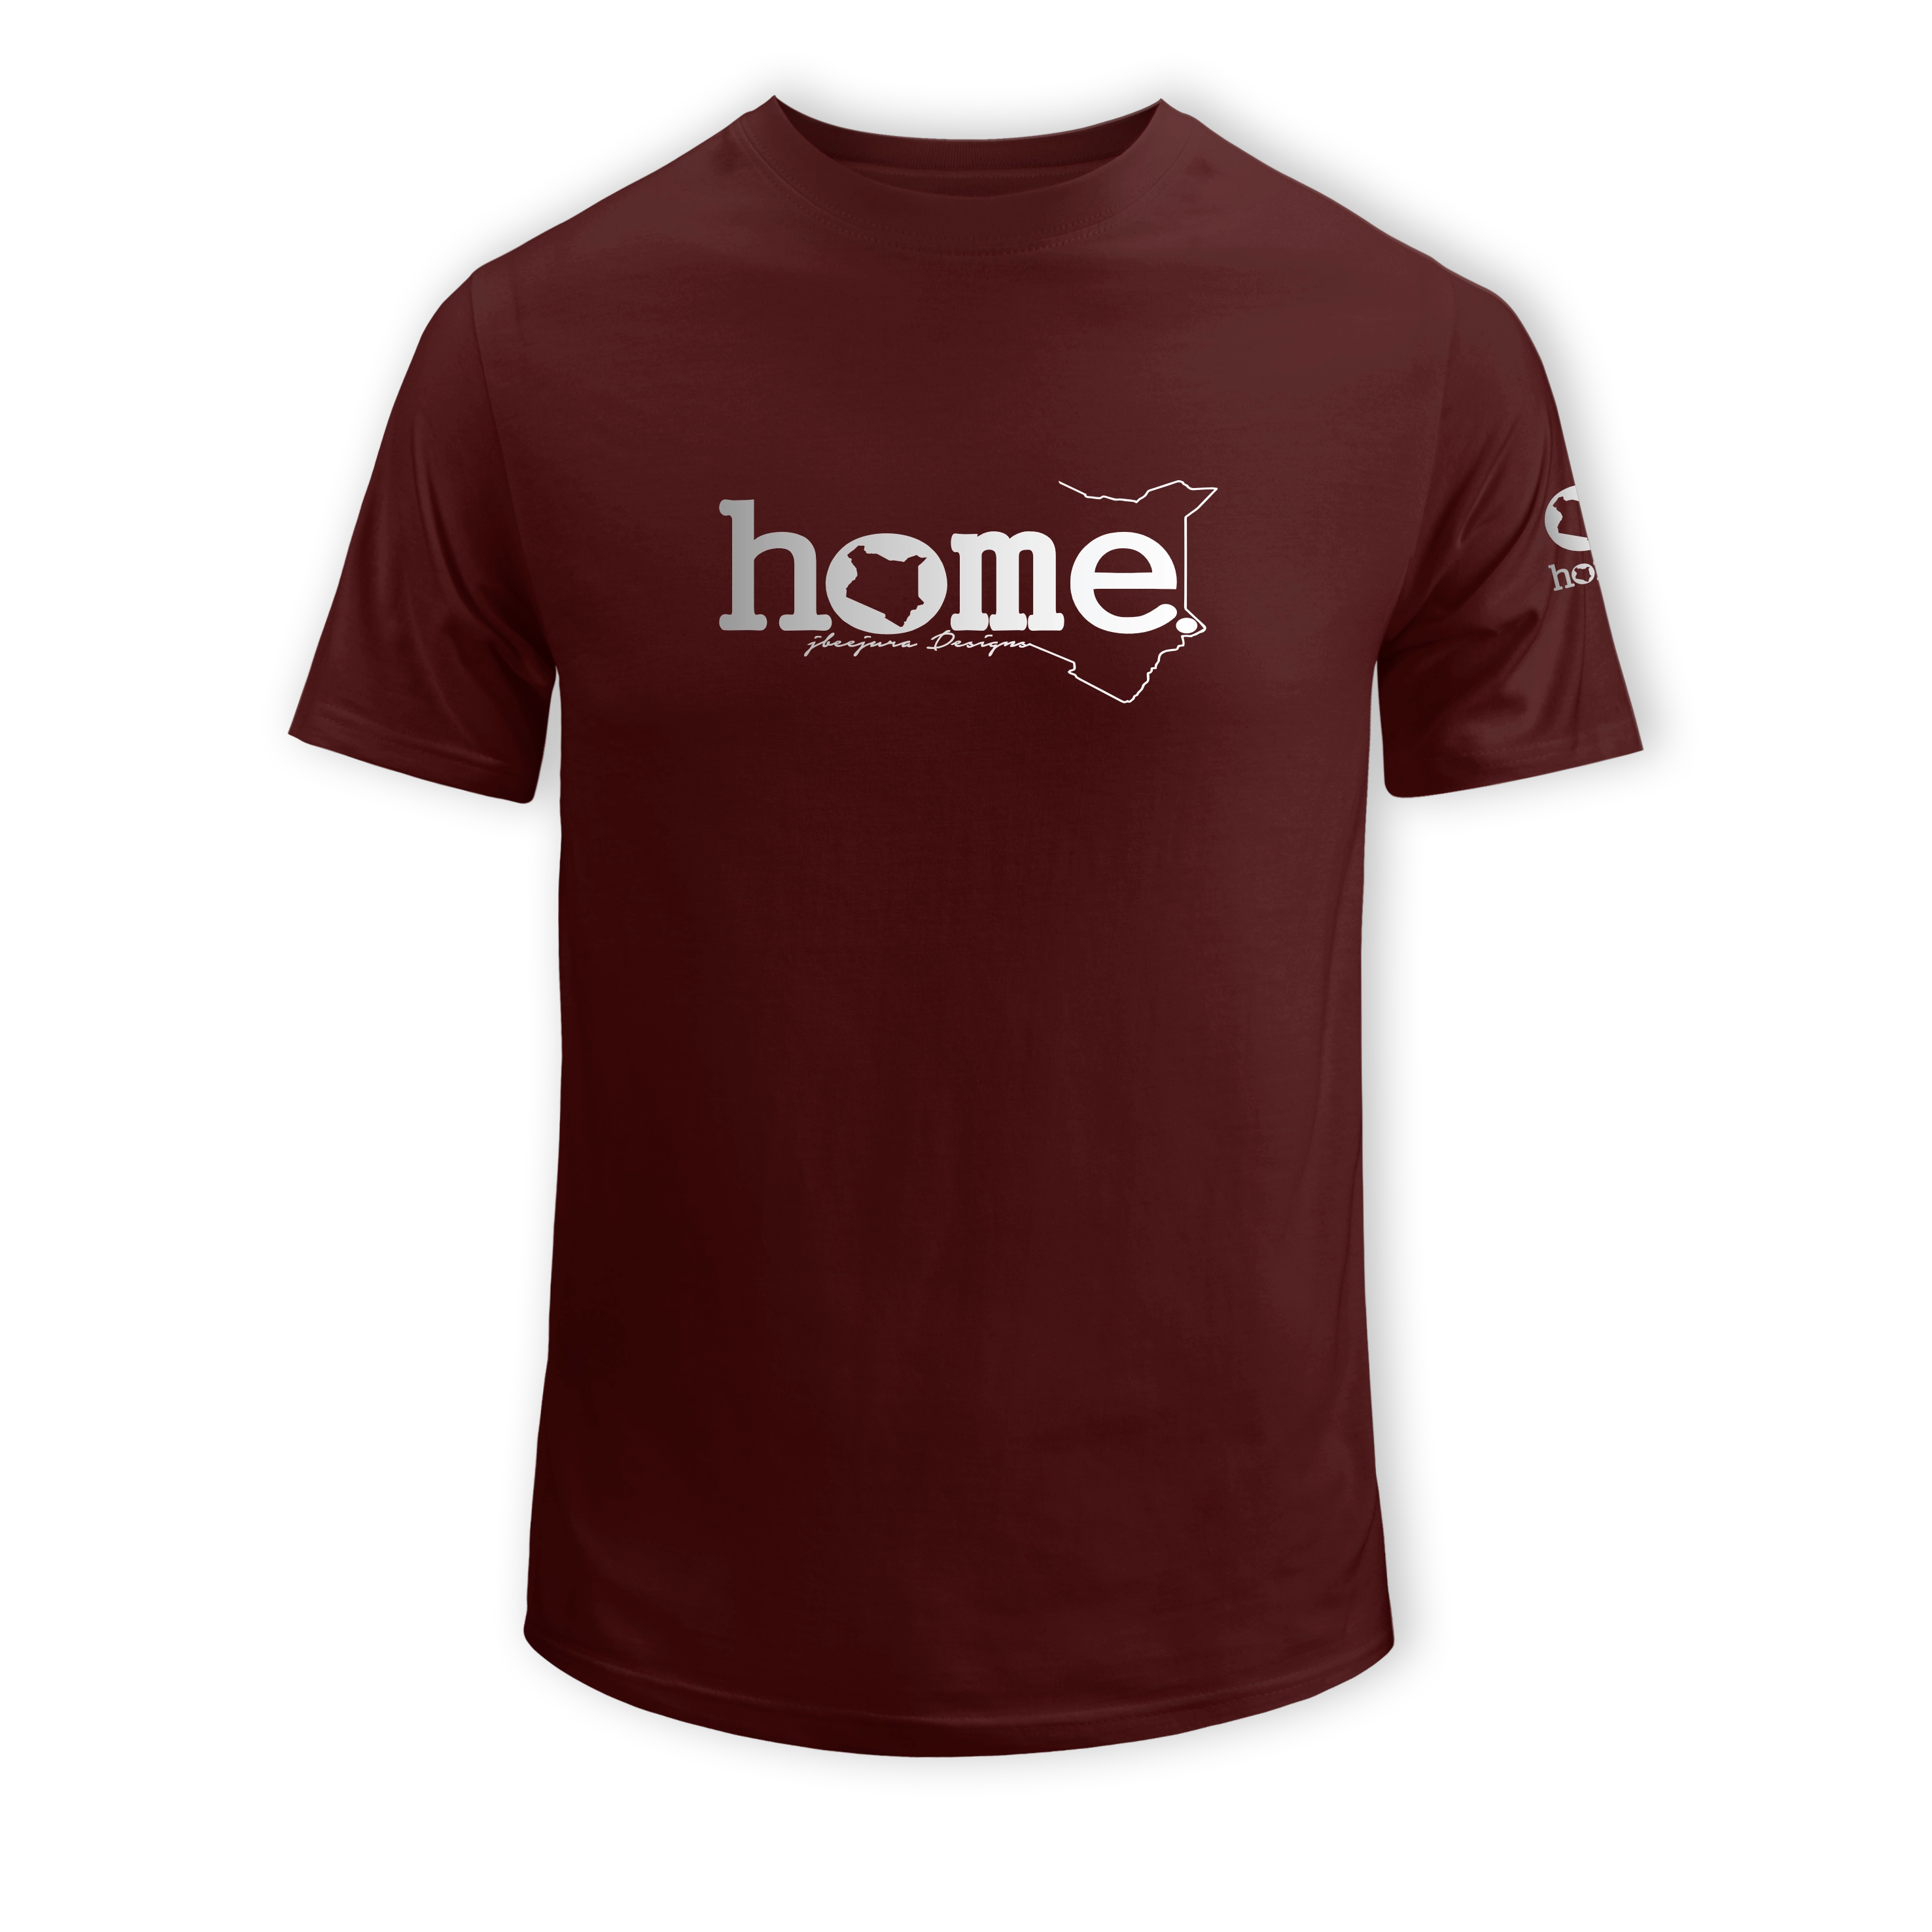 home_254 KIDS SHORT-SLEEVED MAROON T-SHIRT WITH A SILVER CLASSIC WORDS PRINT – COTTON PLUS FABRIC